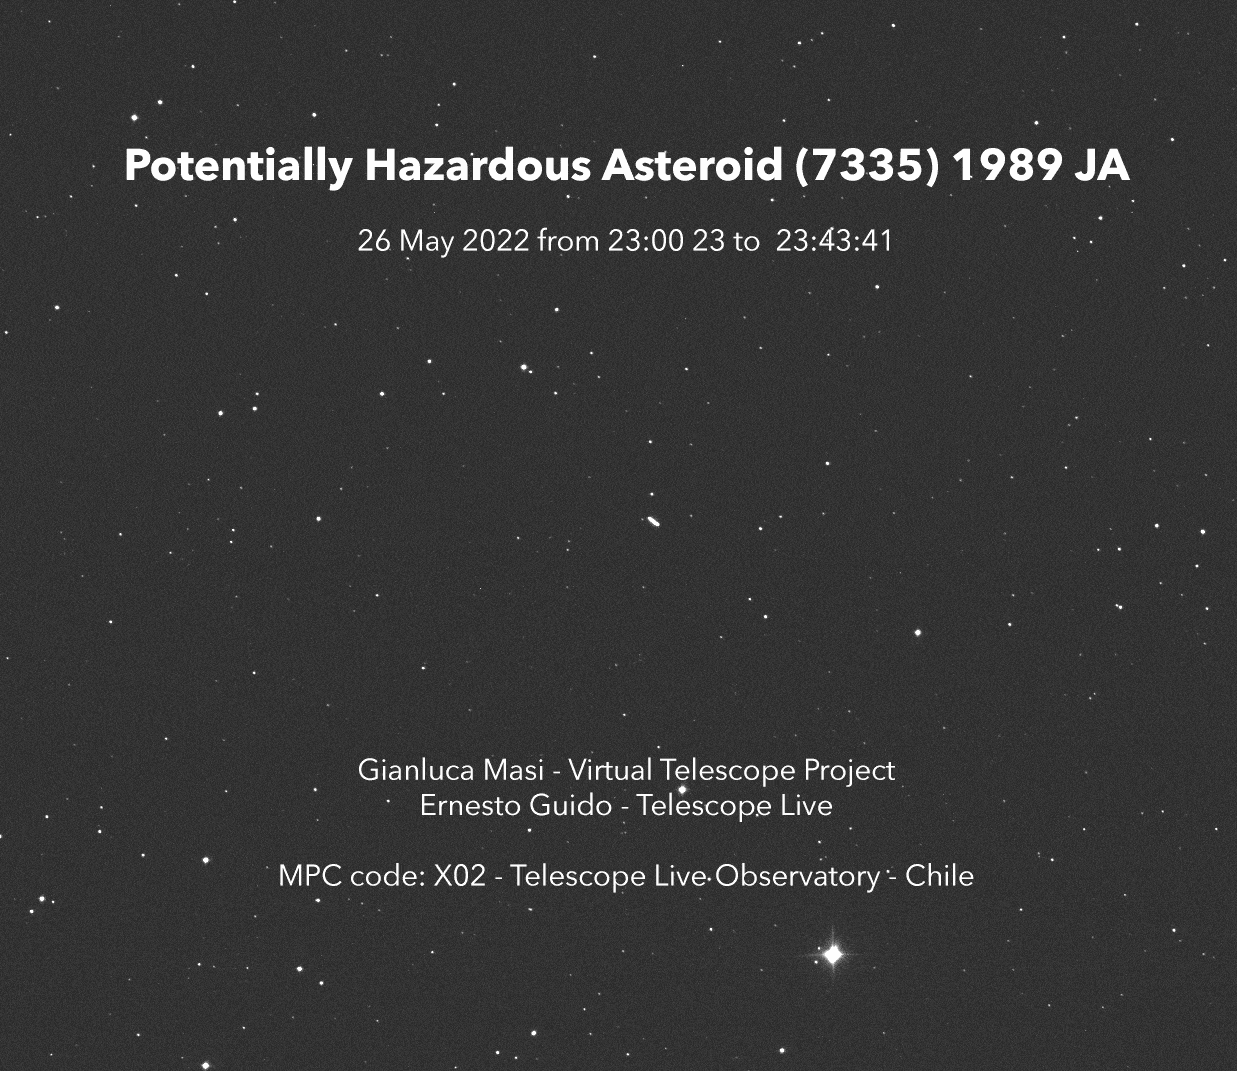 A time-lapse image of asteroid 7335 (1989 JA) passing by Earth on May 27, 2022.